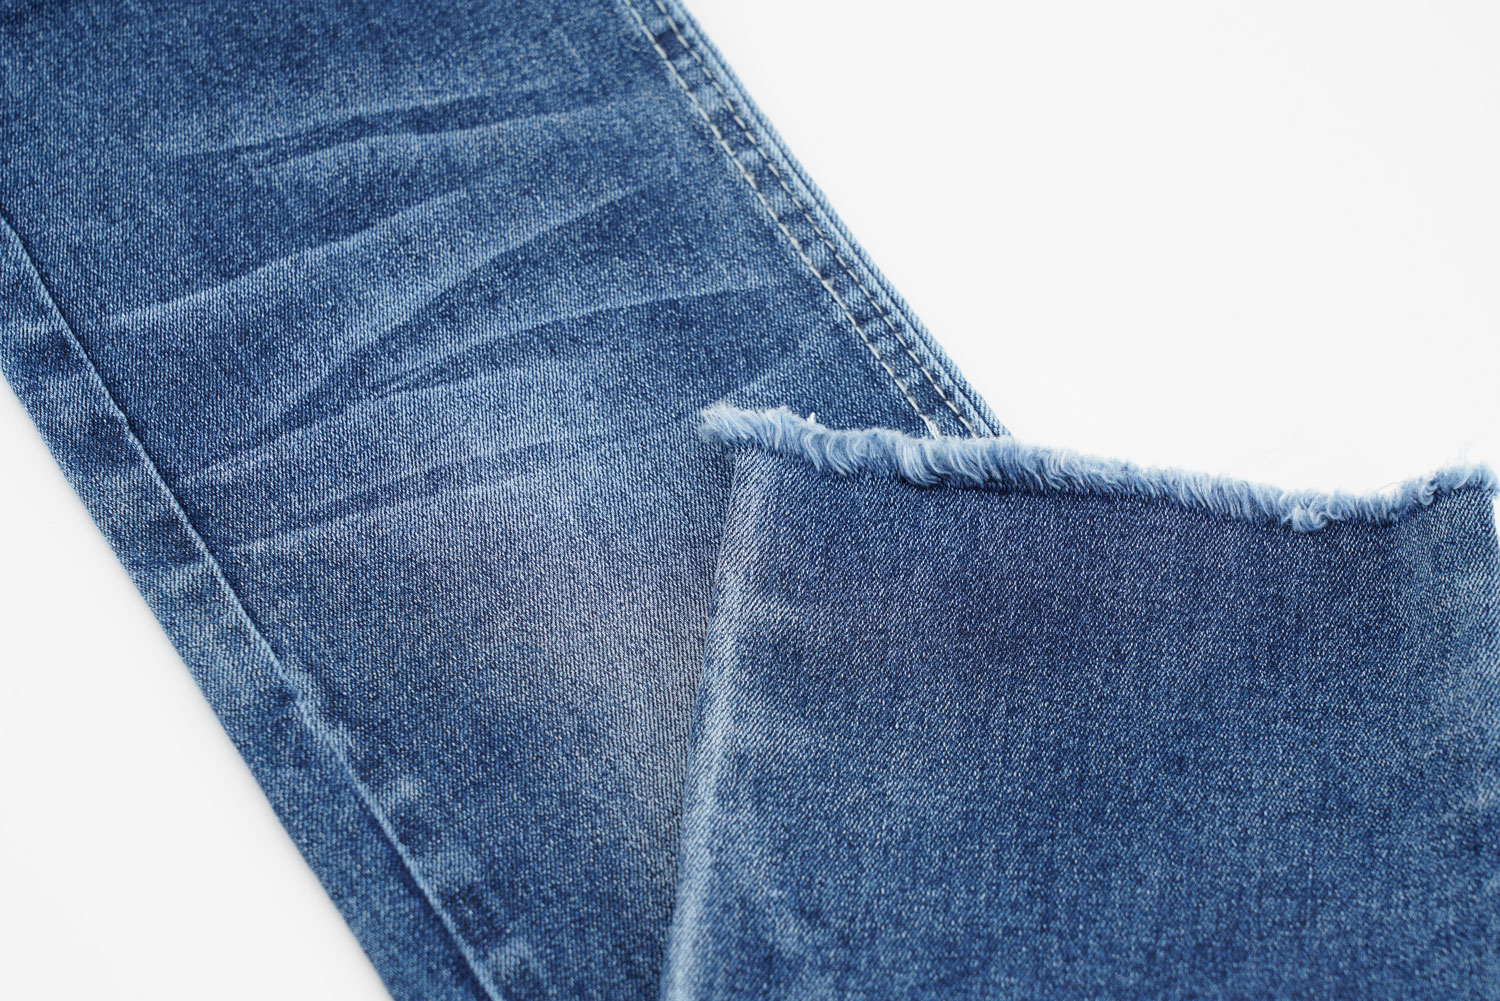 How to Use High Stretch Denim Fabric for Your New Home? 2